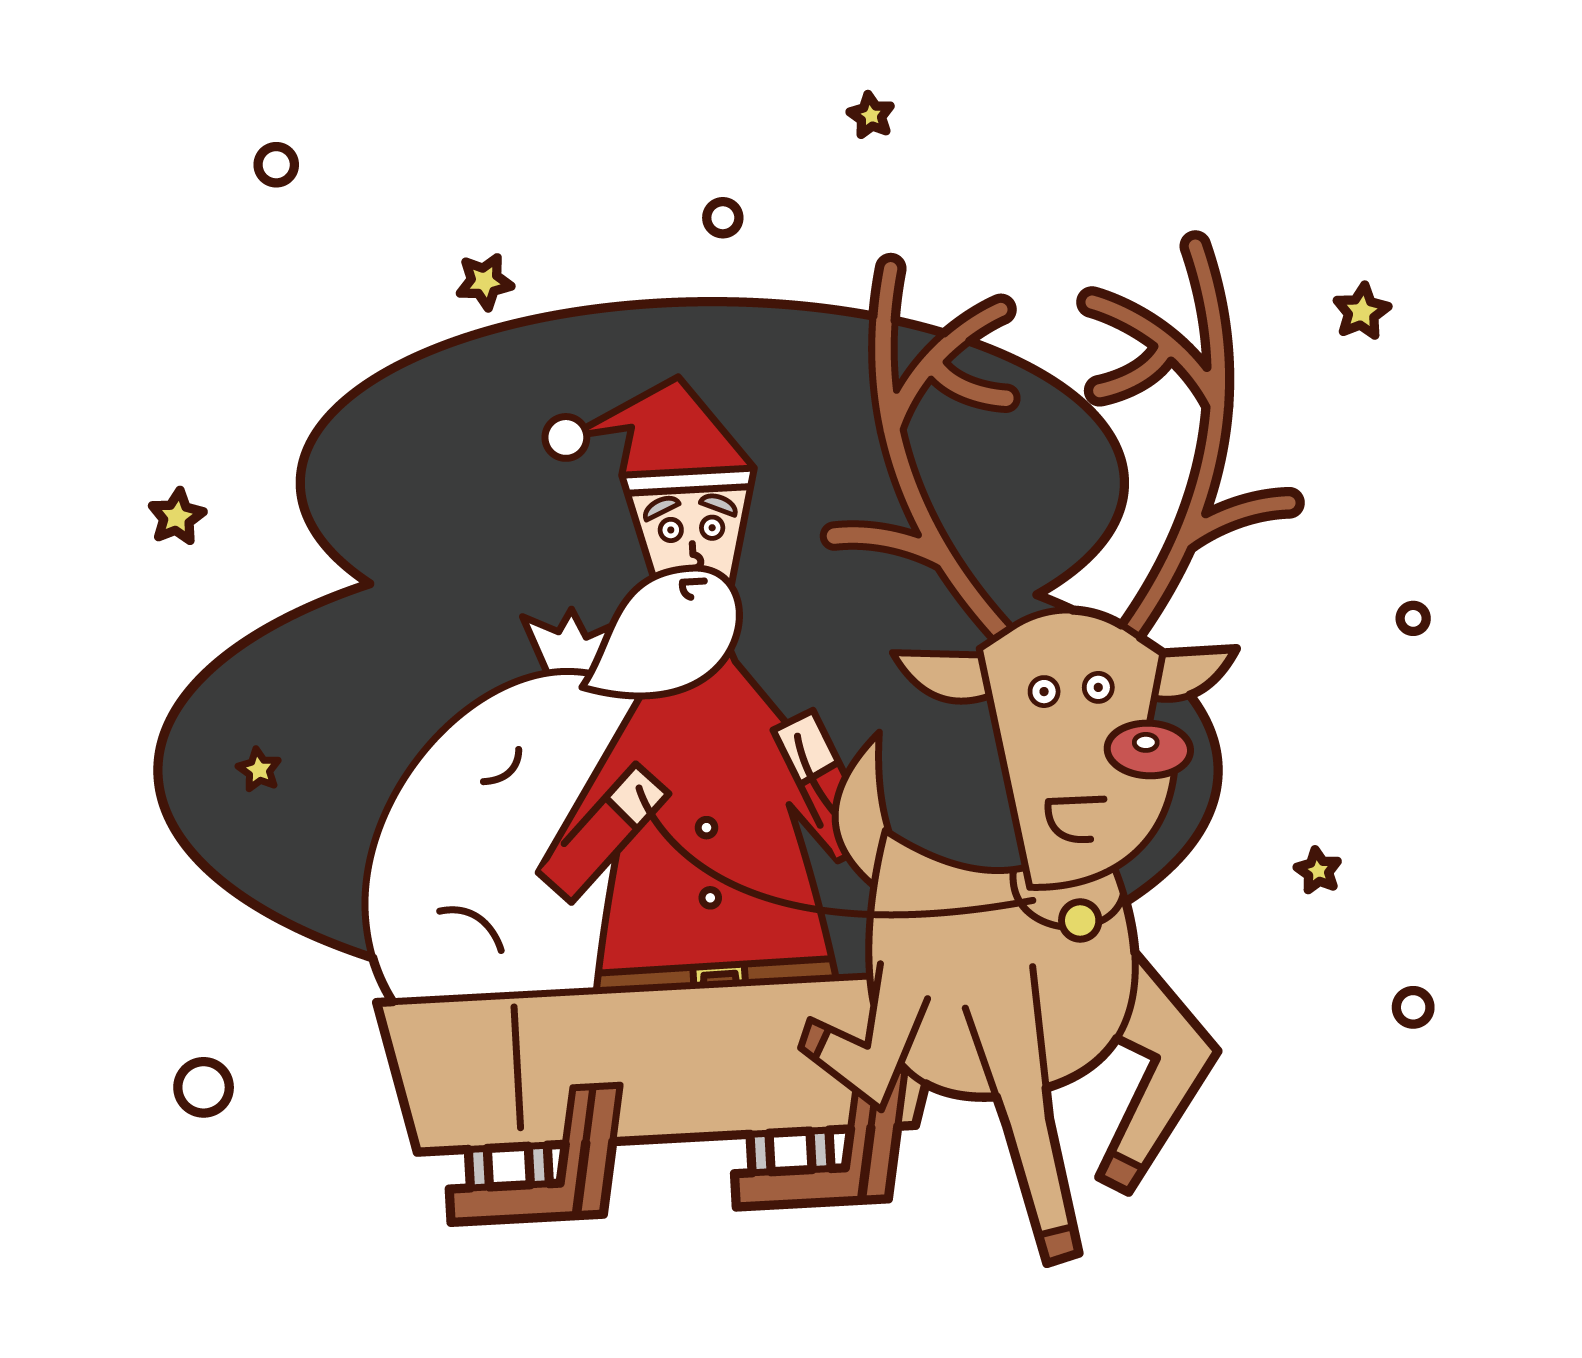 Illustration of Santa Claus on a reindeer and sled